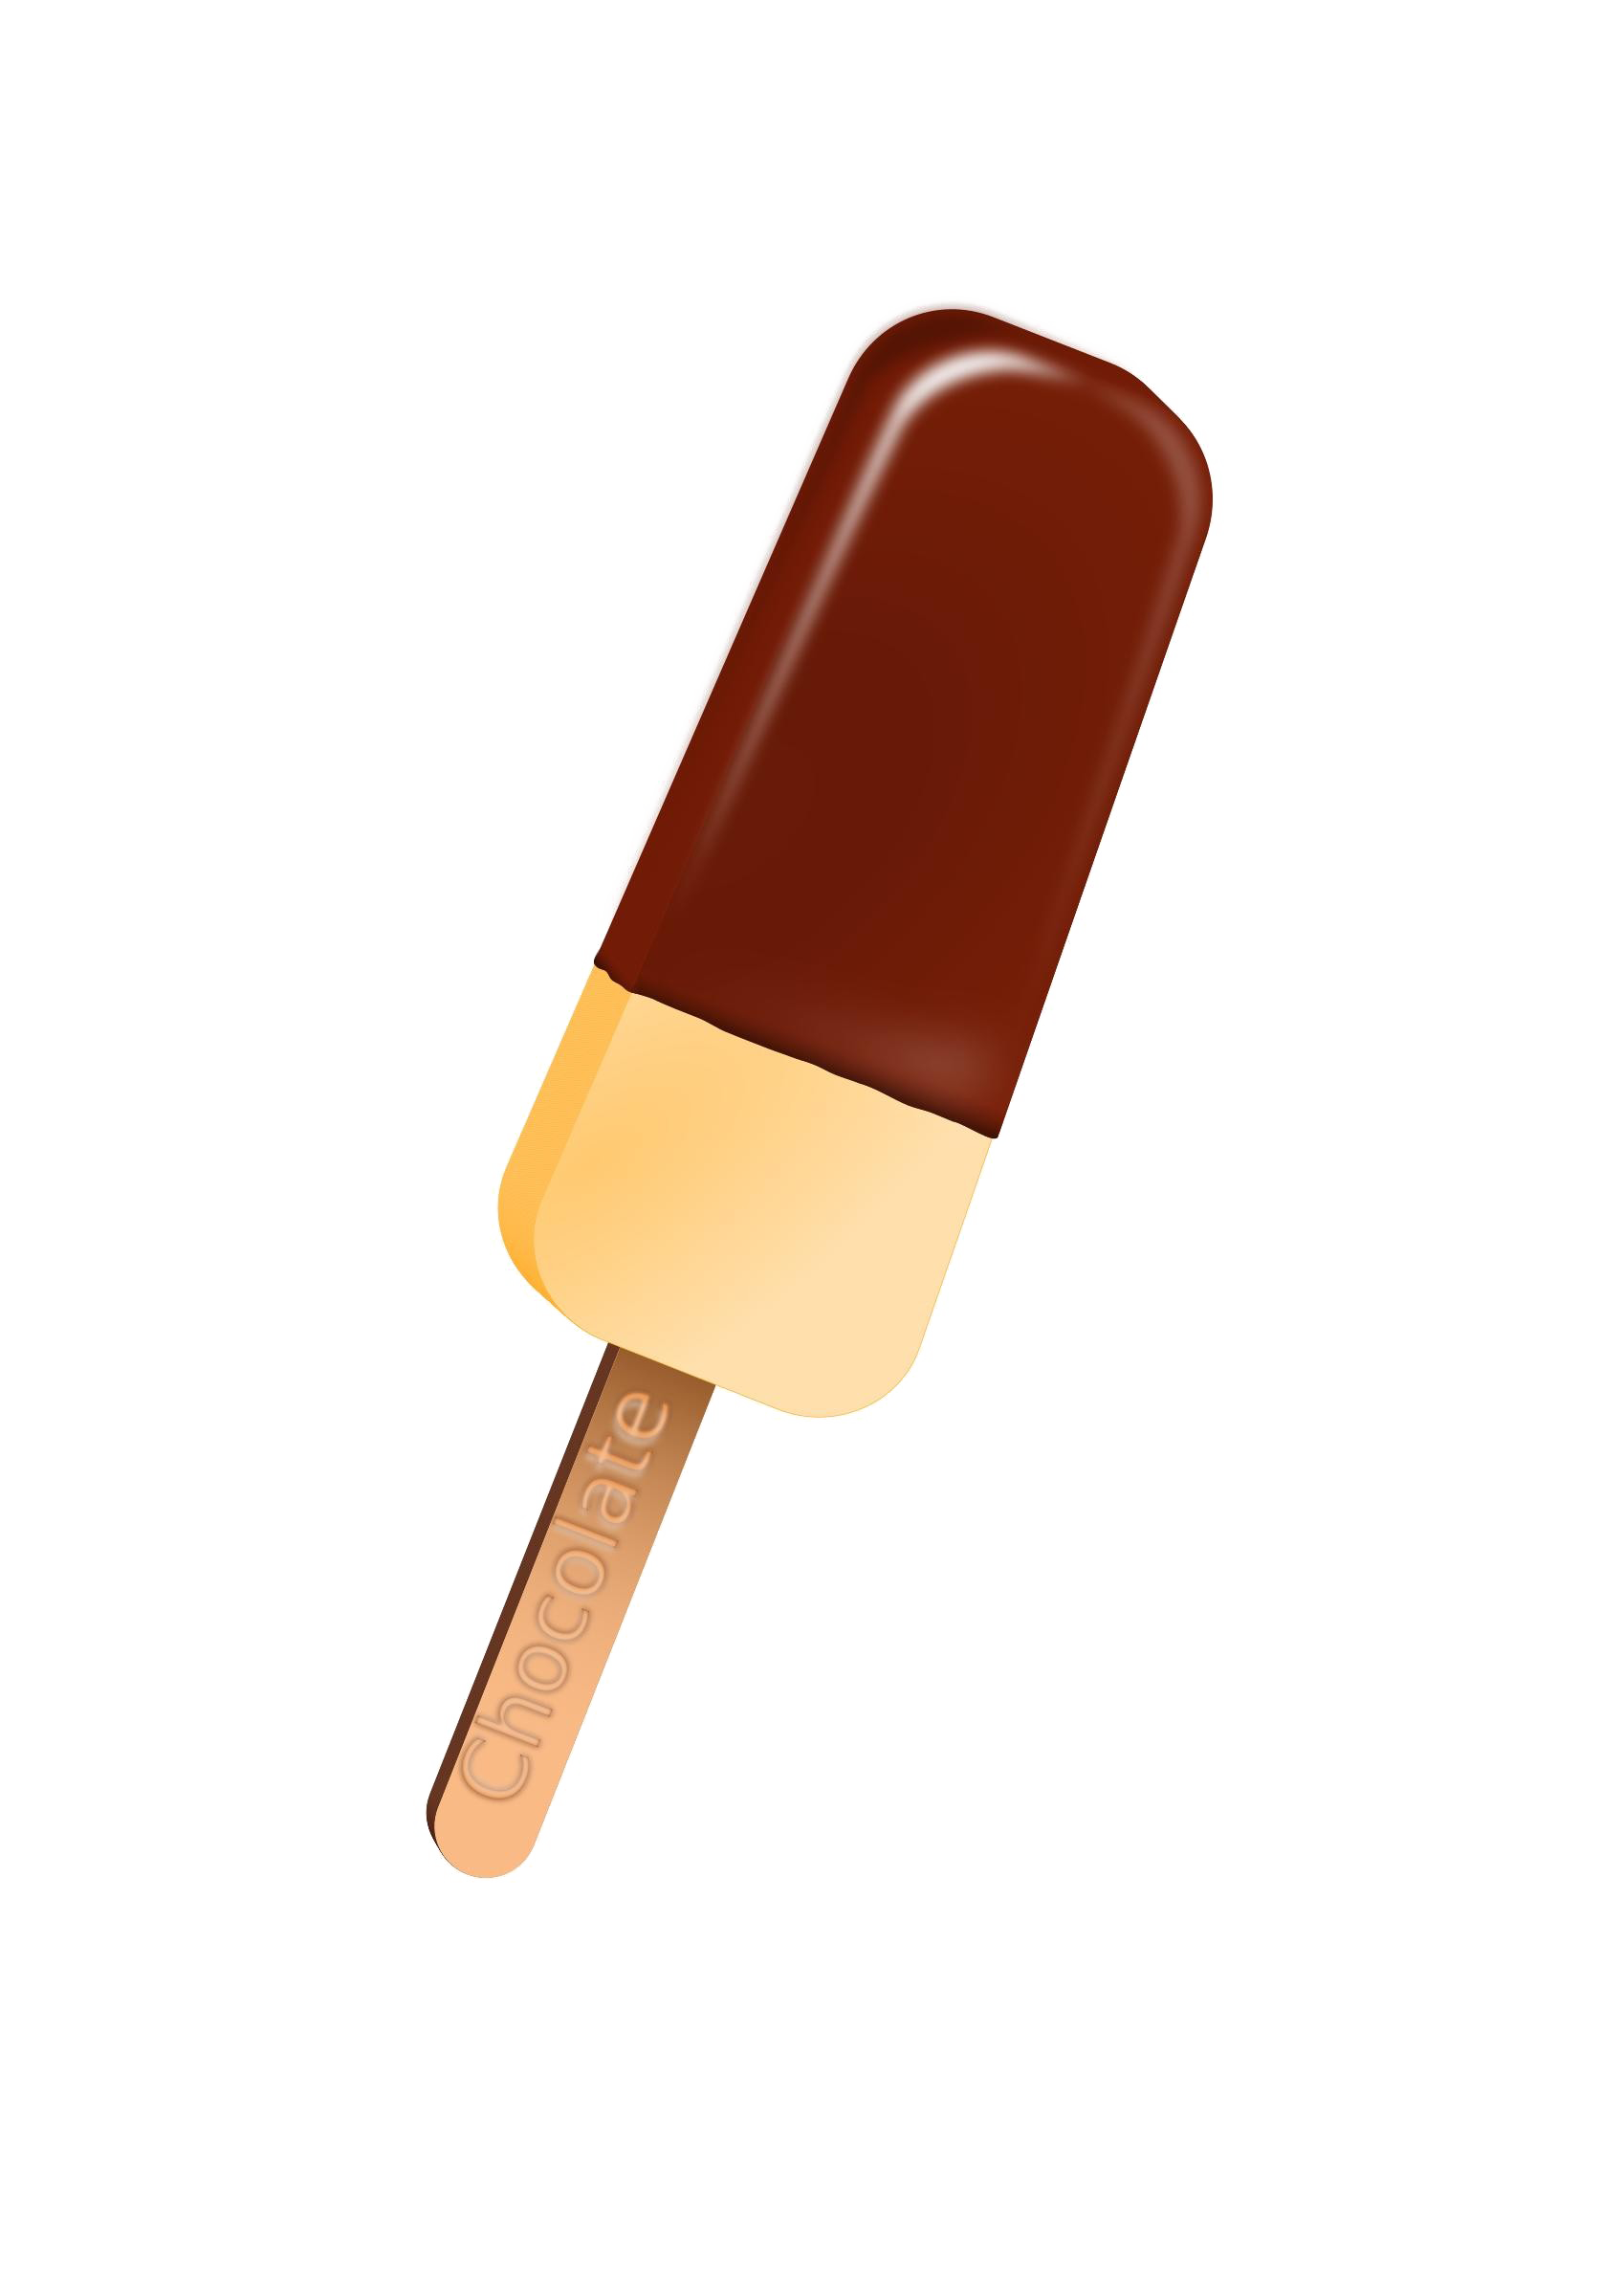 Ice Pop Free Clipart HD PNG Image